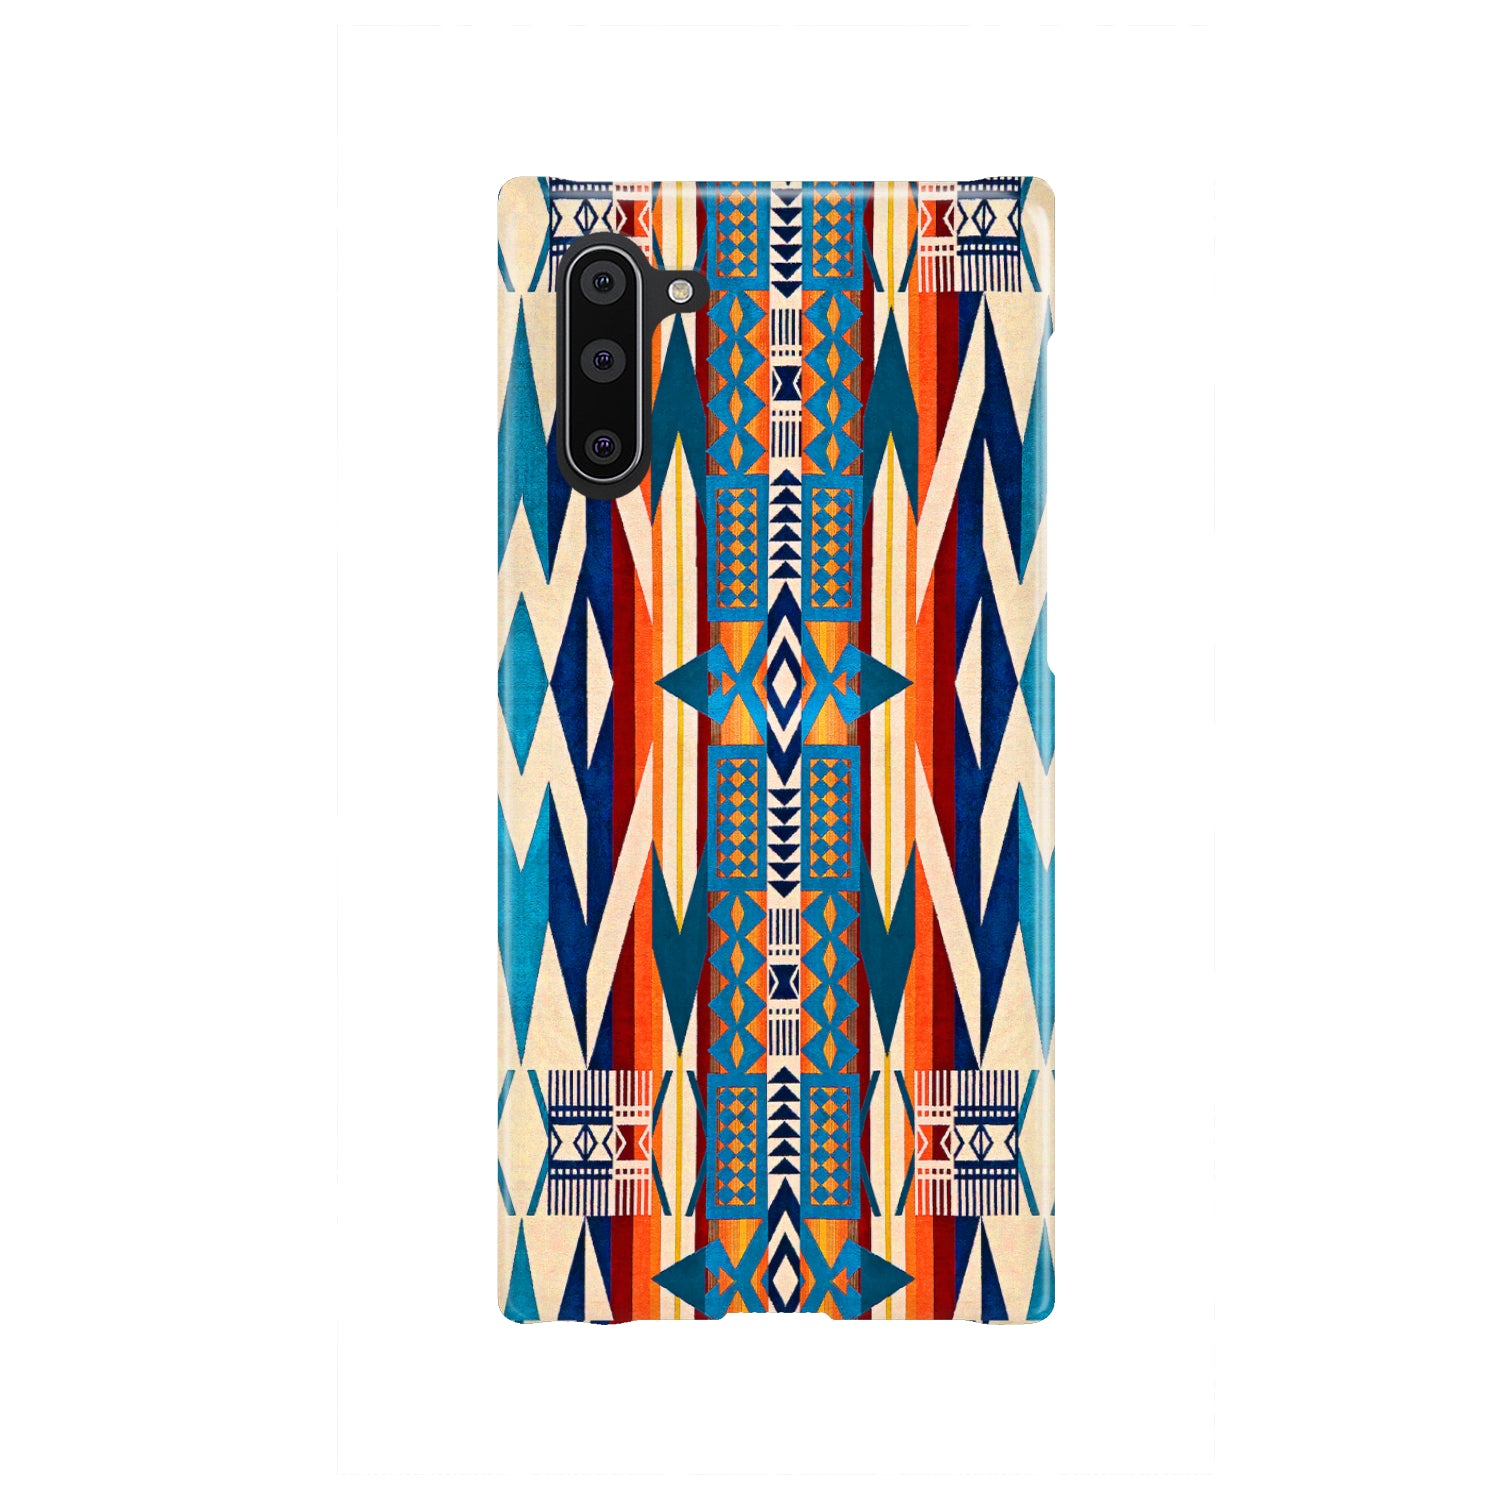 Powwow Storepc0001 patter color native american phone case new